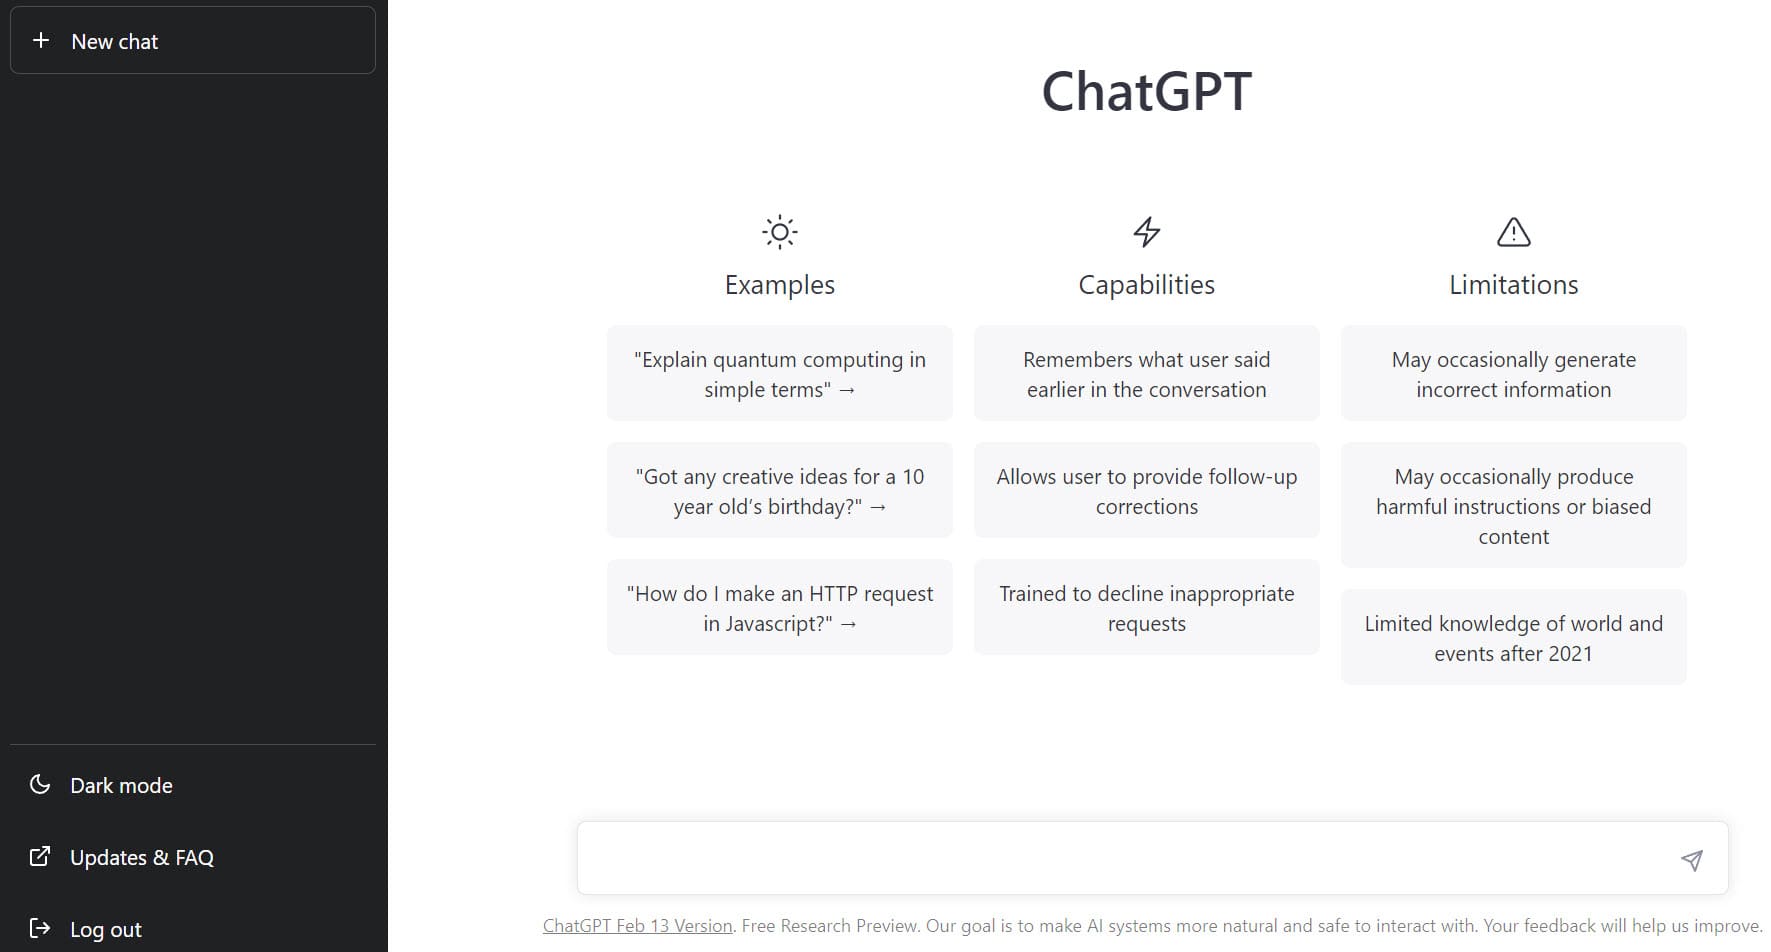 How to create an account on ChatGPT